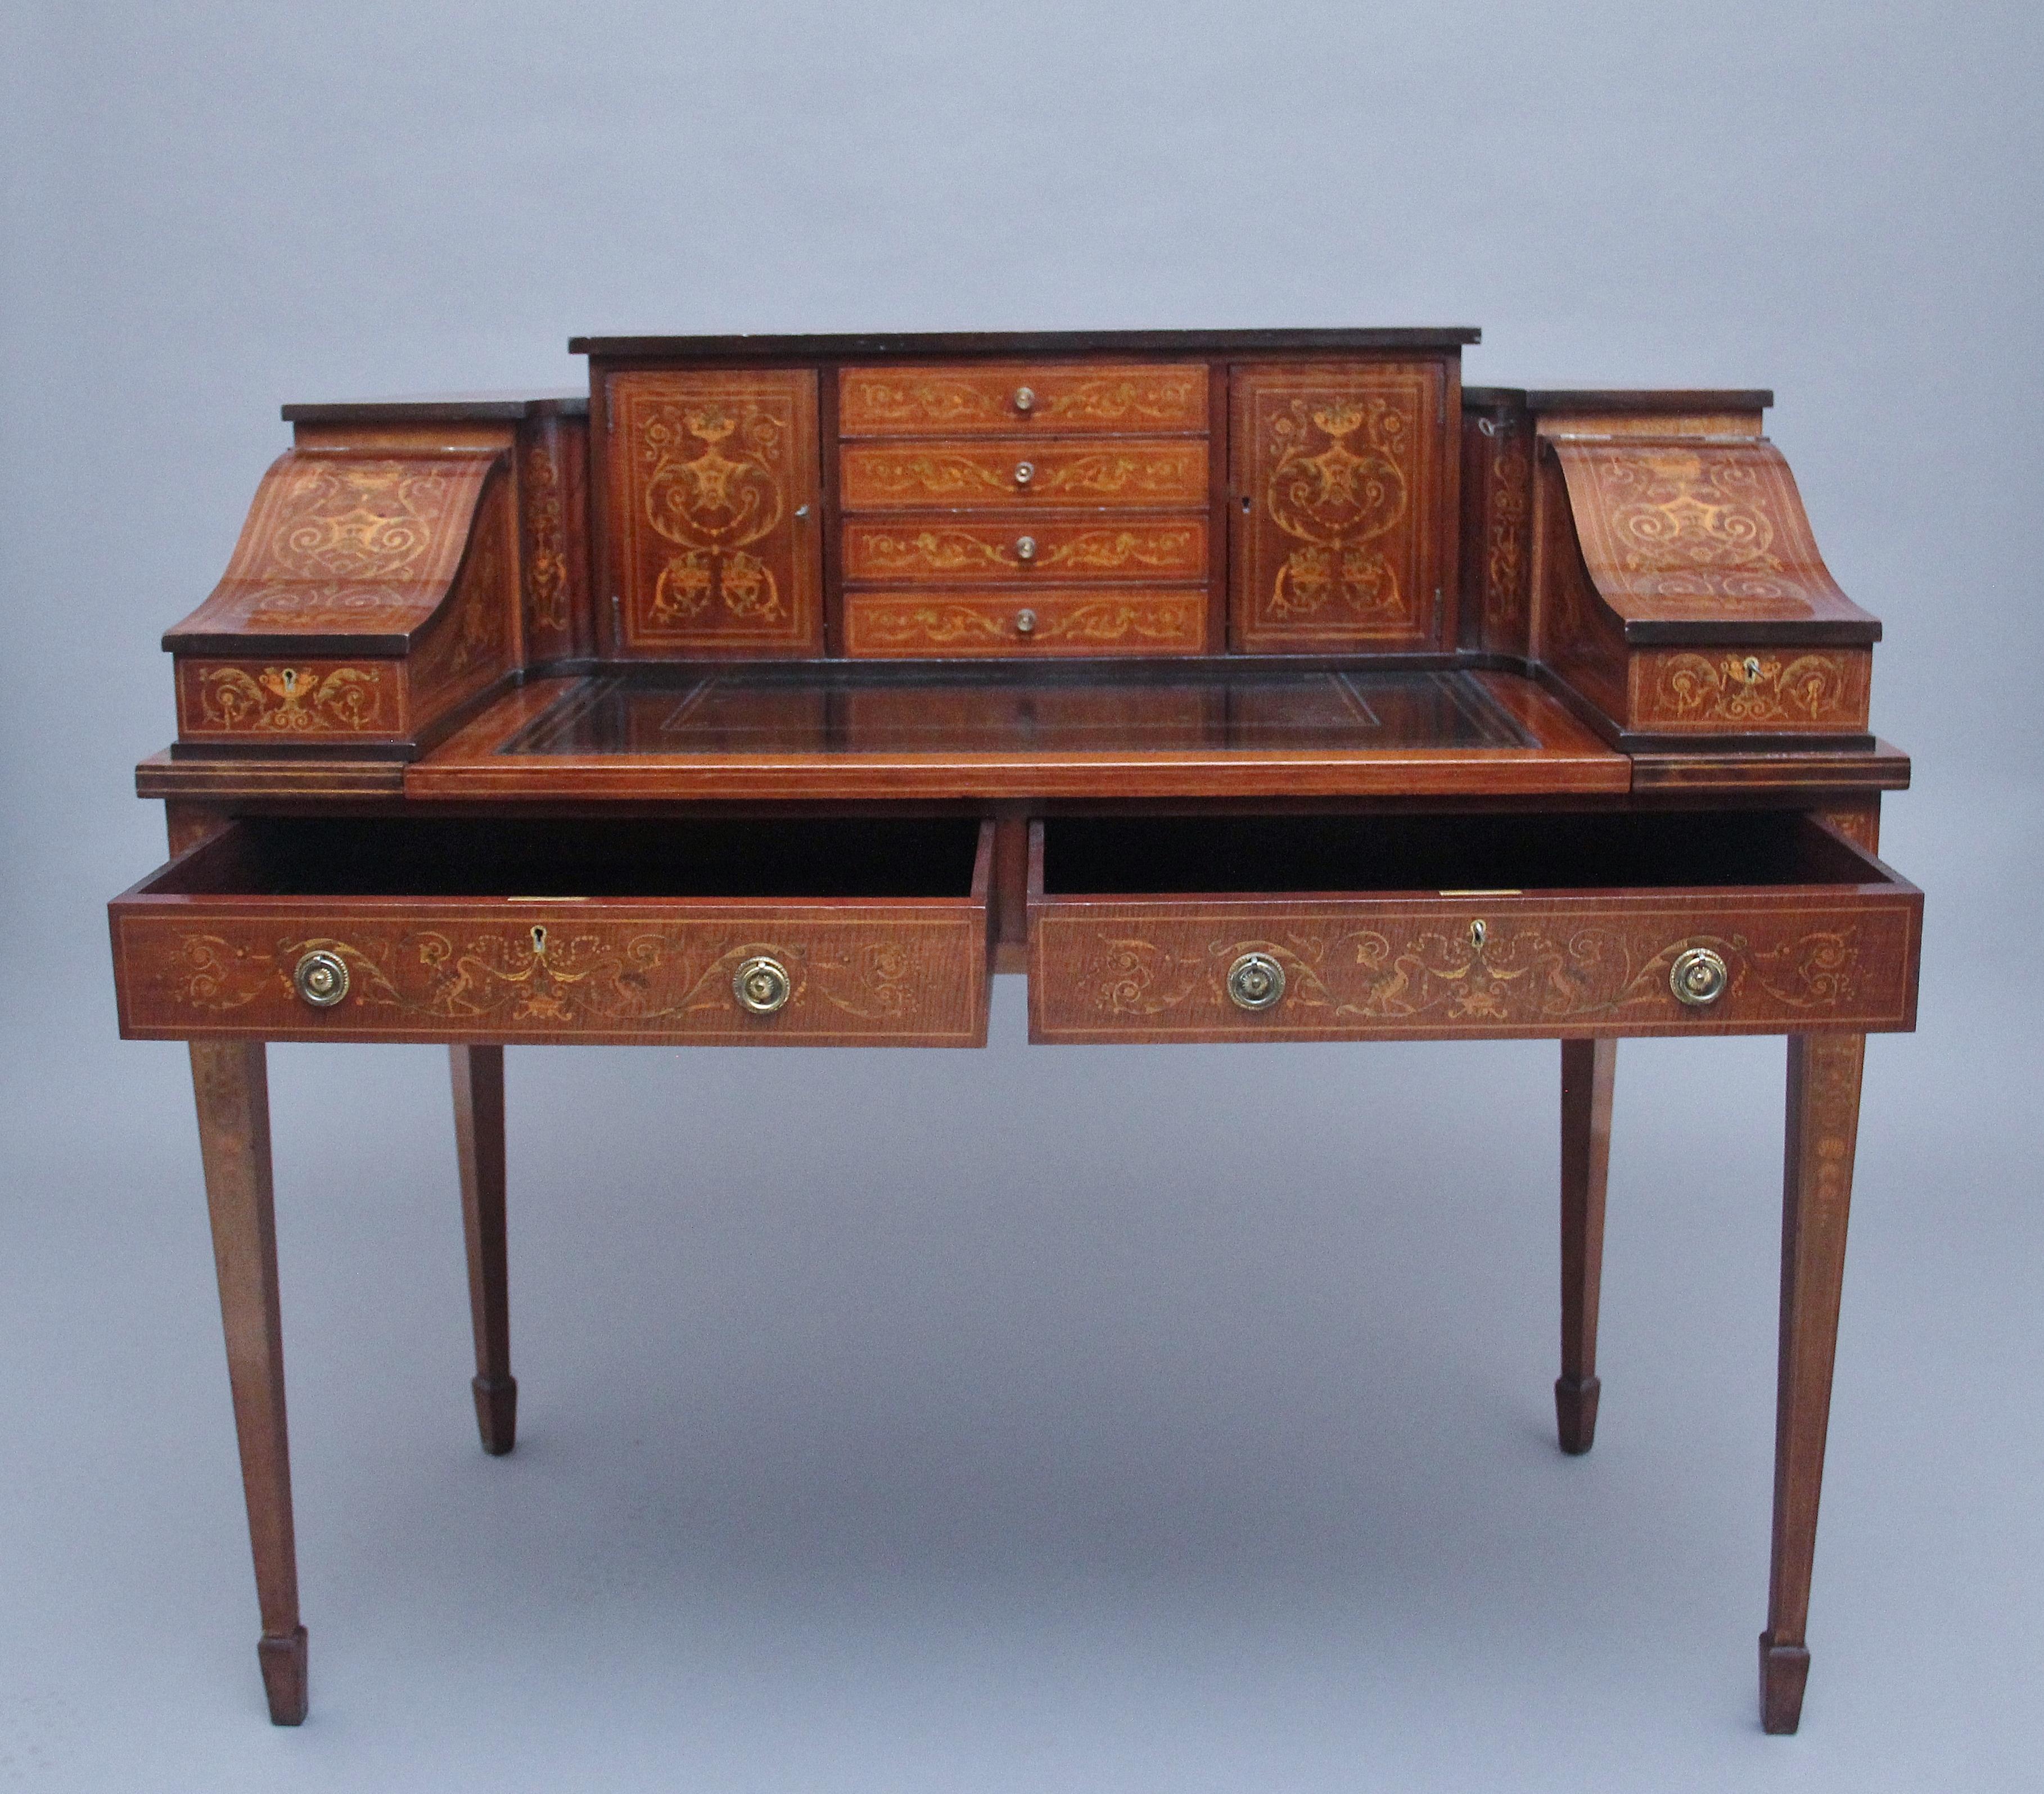 A fabulous quality freestanding early 20th Century mahogany and inlaid Carlton house desk, the super structure comprising of four mahogany inlaid drawers at the centre with original brass turned knob handles, cupboards either side with workable lock